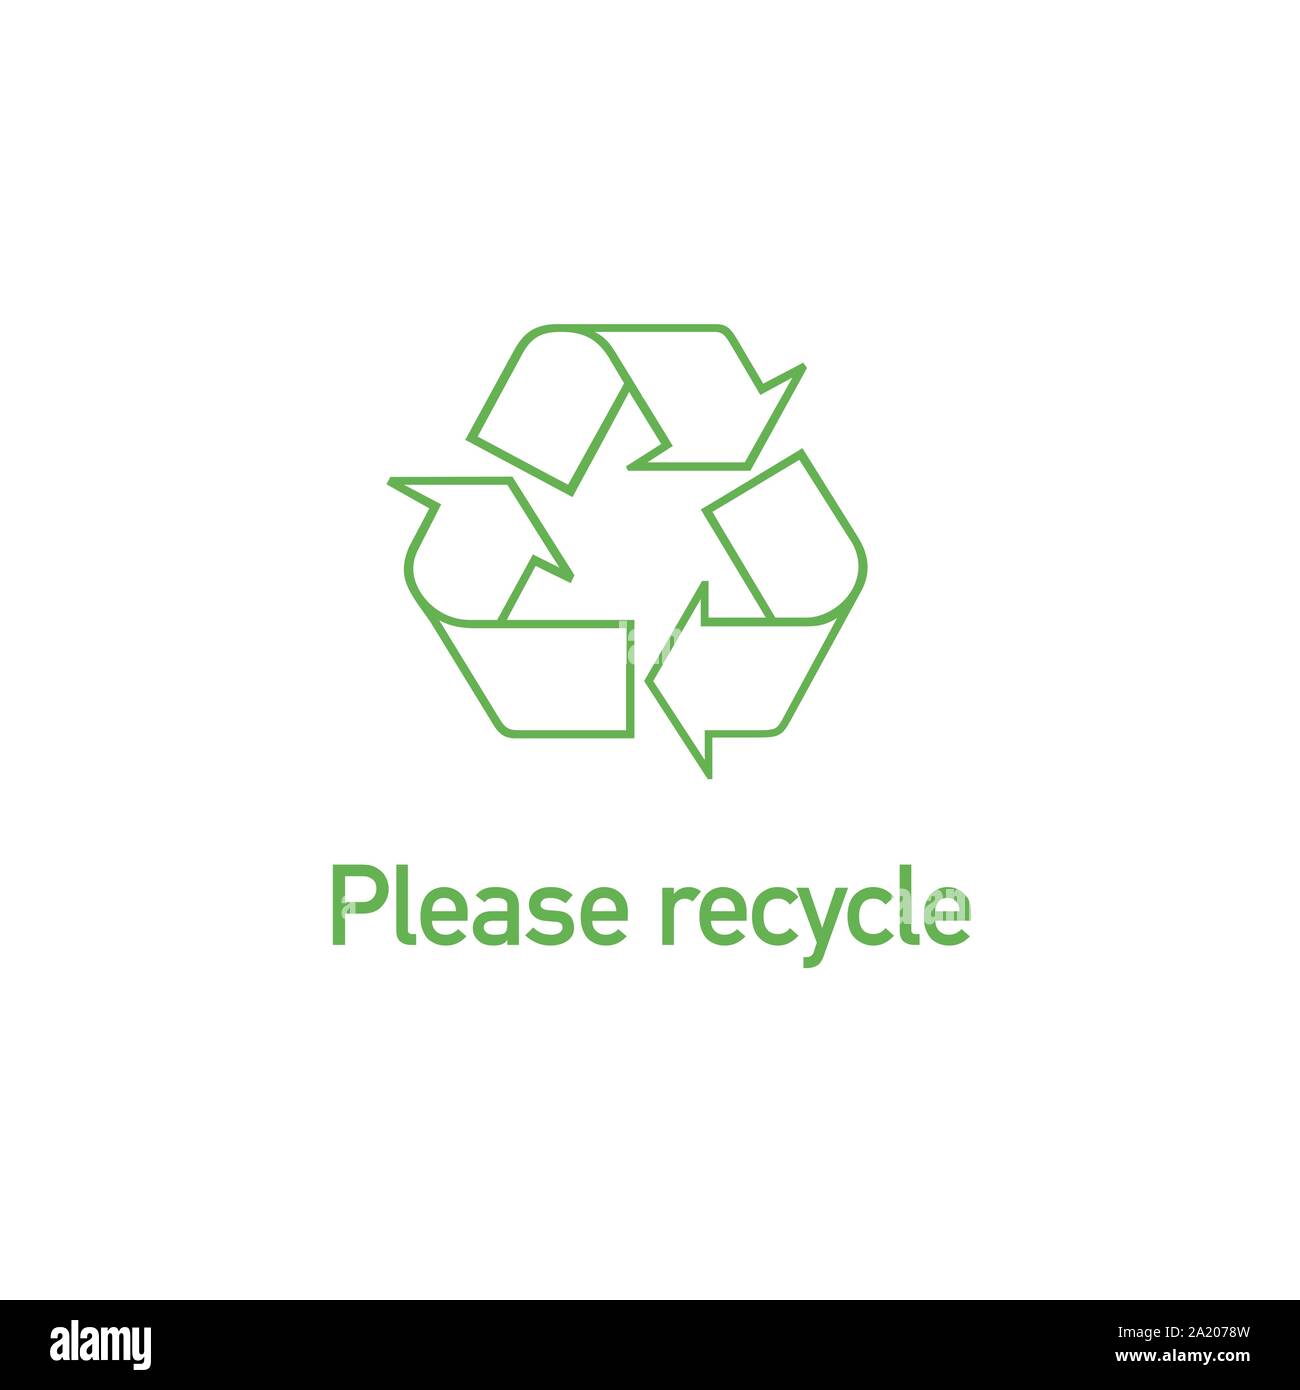 Green Linear recycle icon with text Please recycle. Stock Vector illustration isolated on white background. Stock Vector